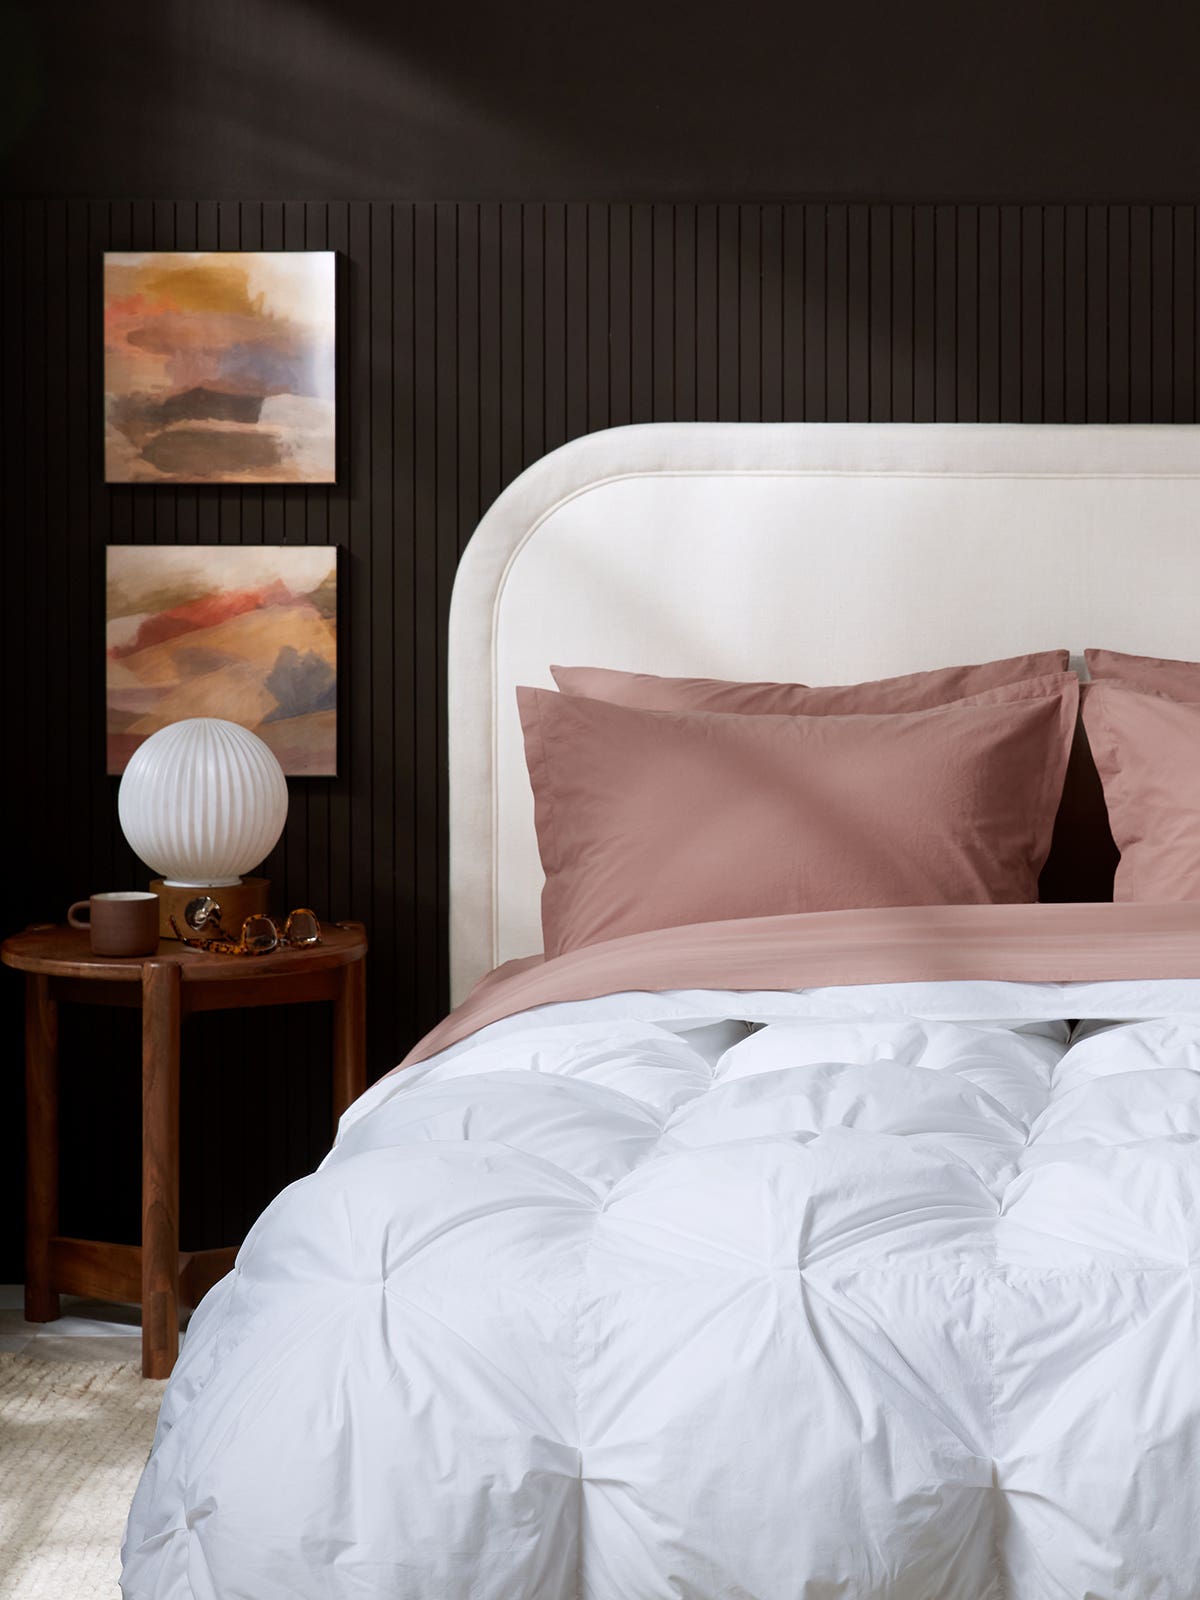 This Puffy Parachute Comforter Has Sold Out Twice—Now It’s Back in 2 New Colors